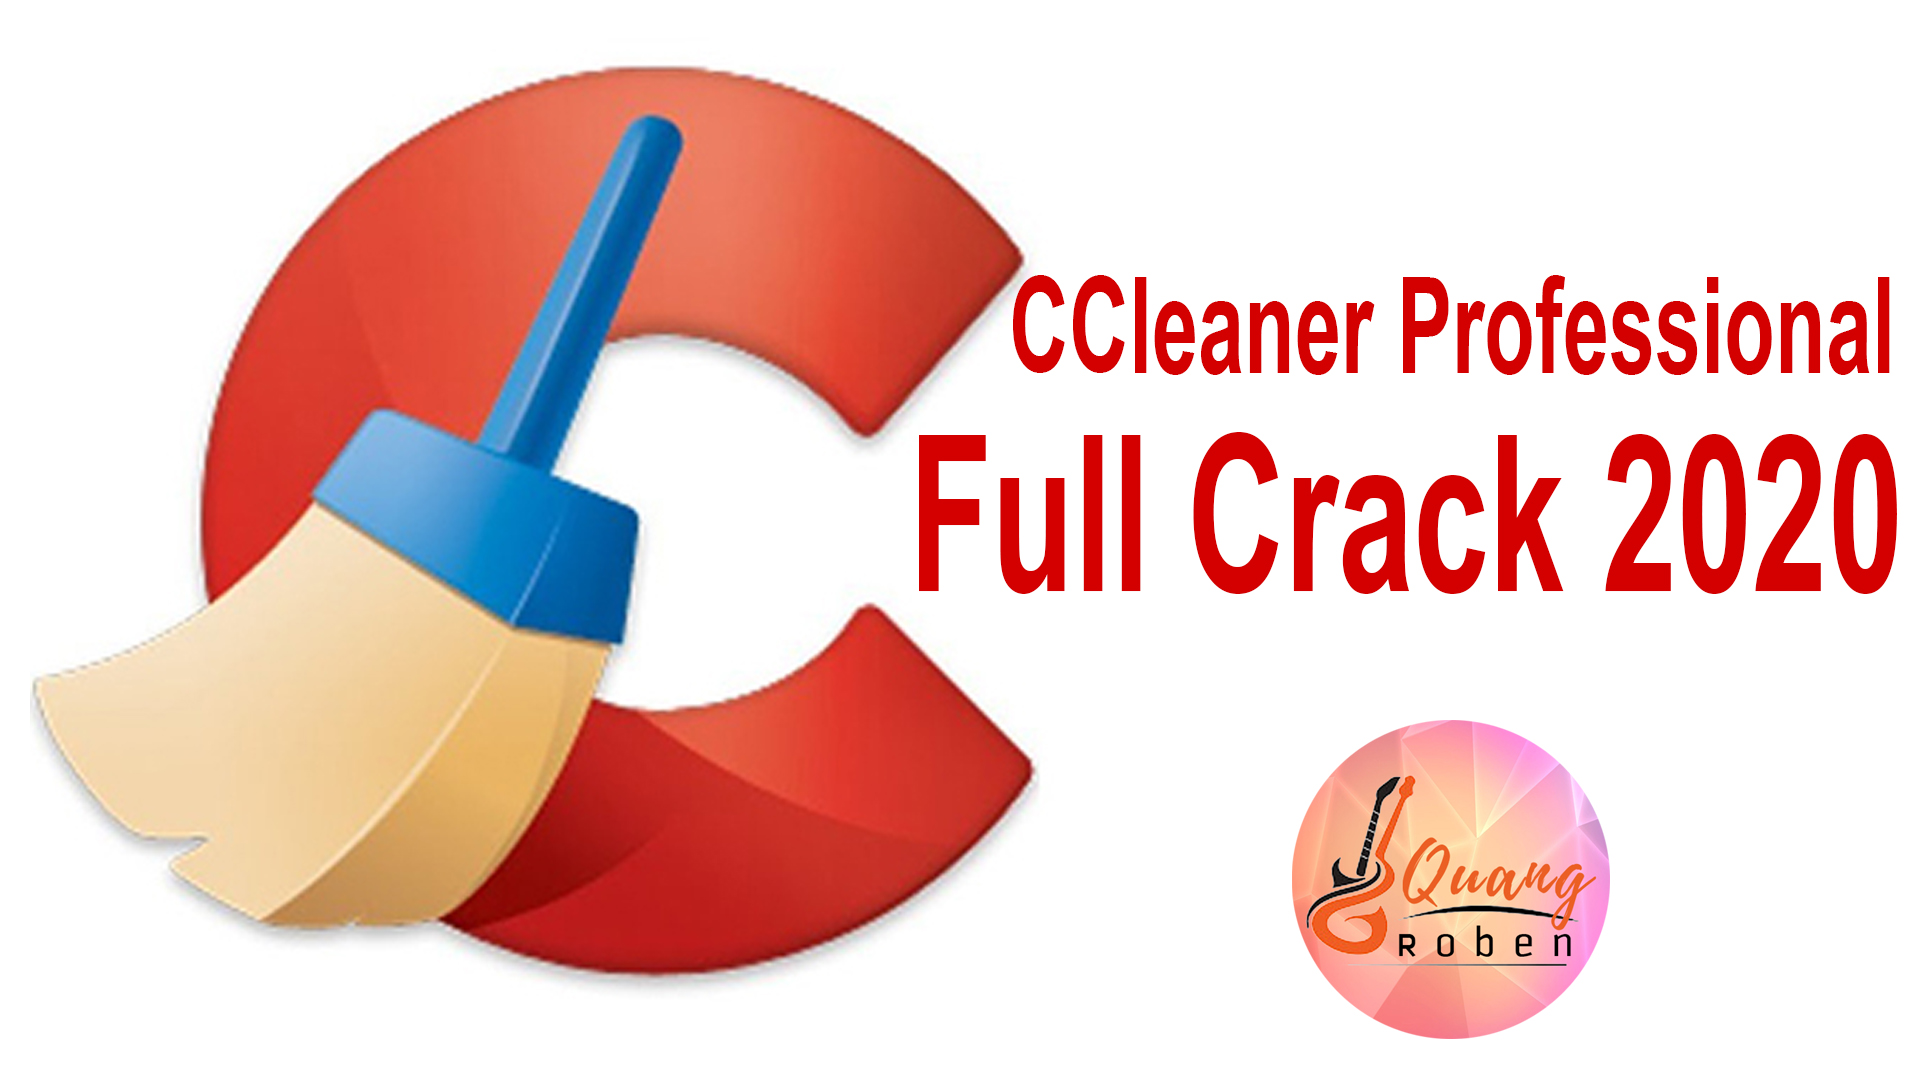 ccleaner professional review 2020